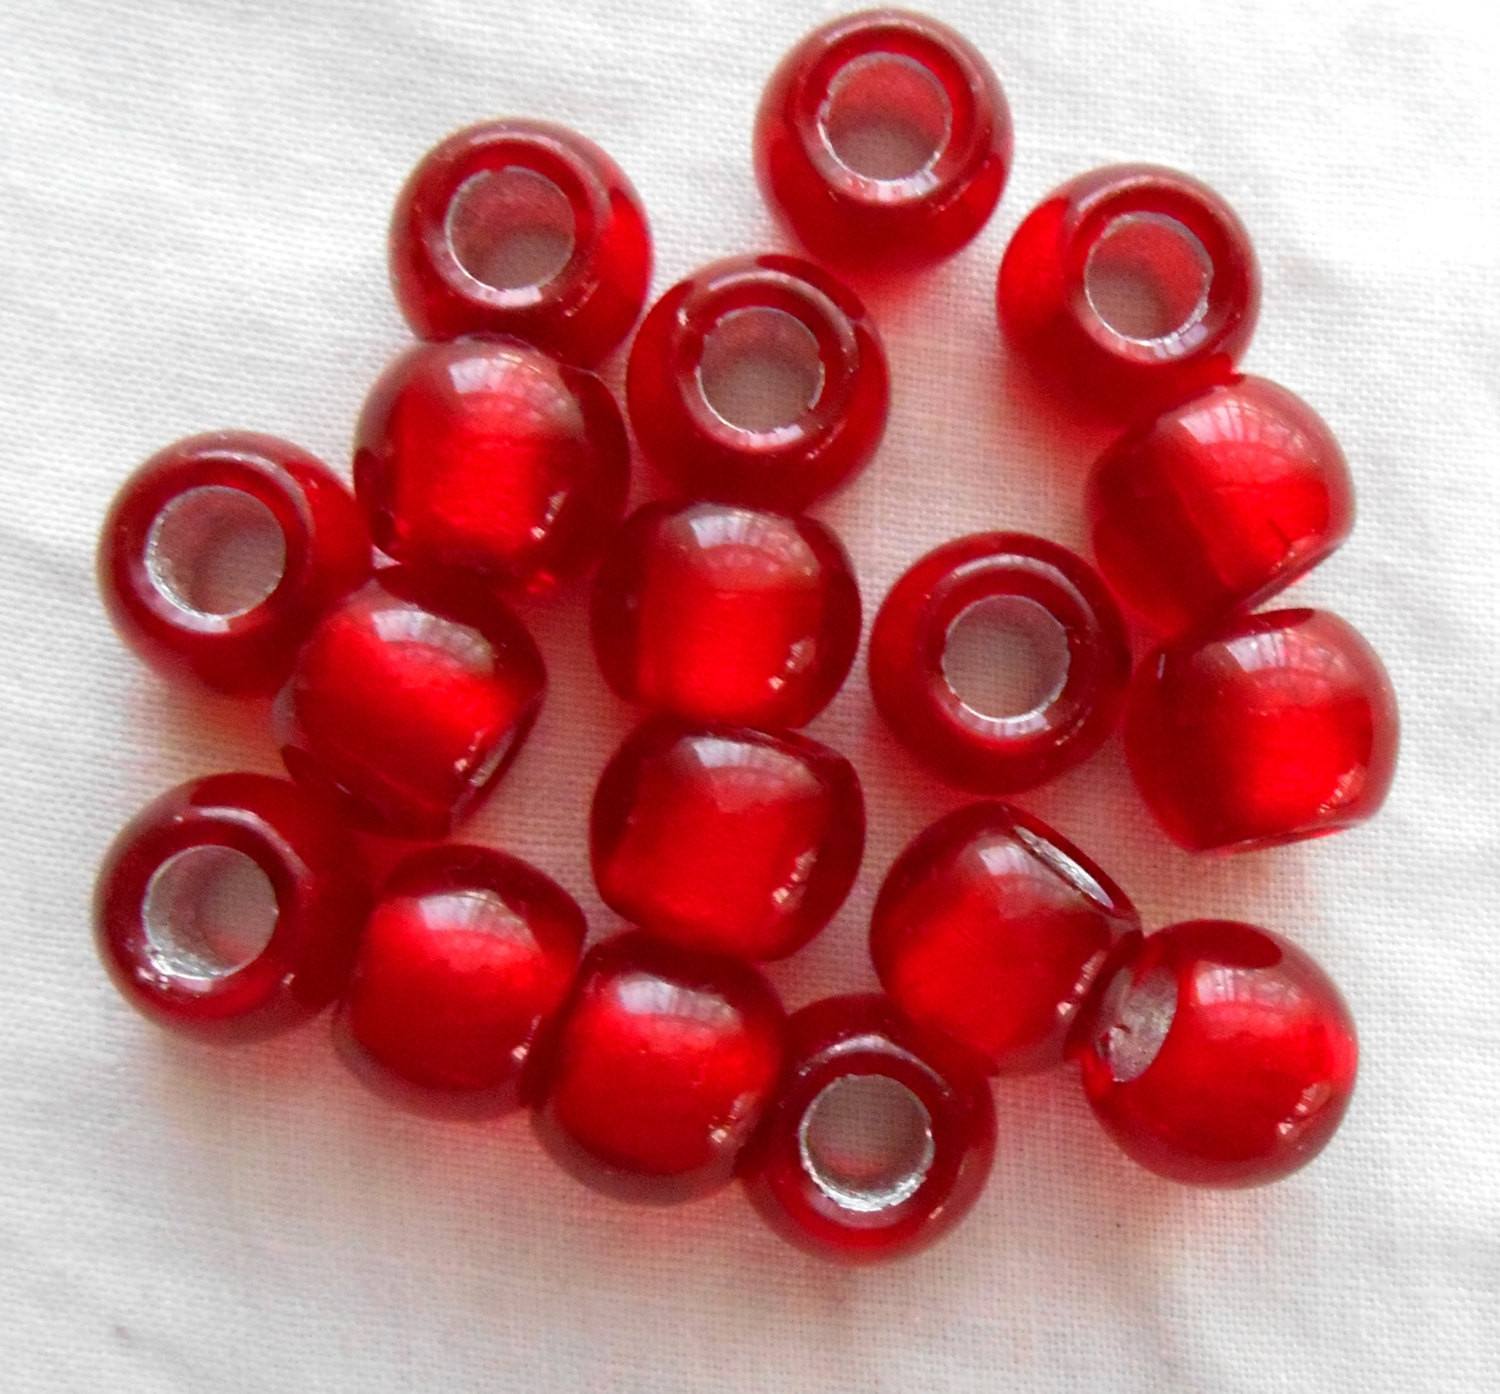 50 Bright Red Round High Quality Glass Beads - (6mm) - Australia Online  Beads